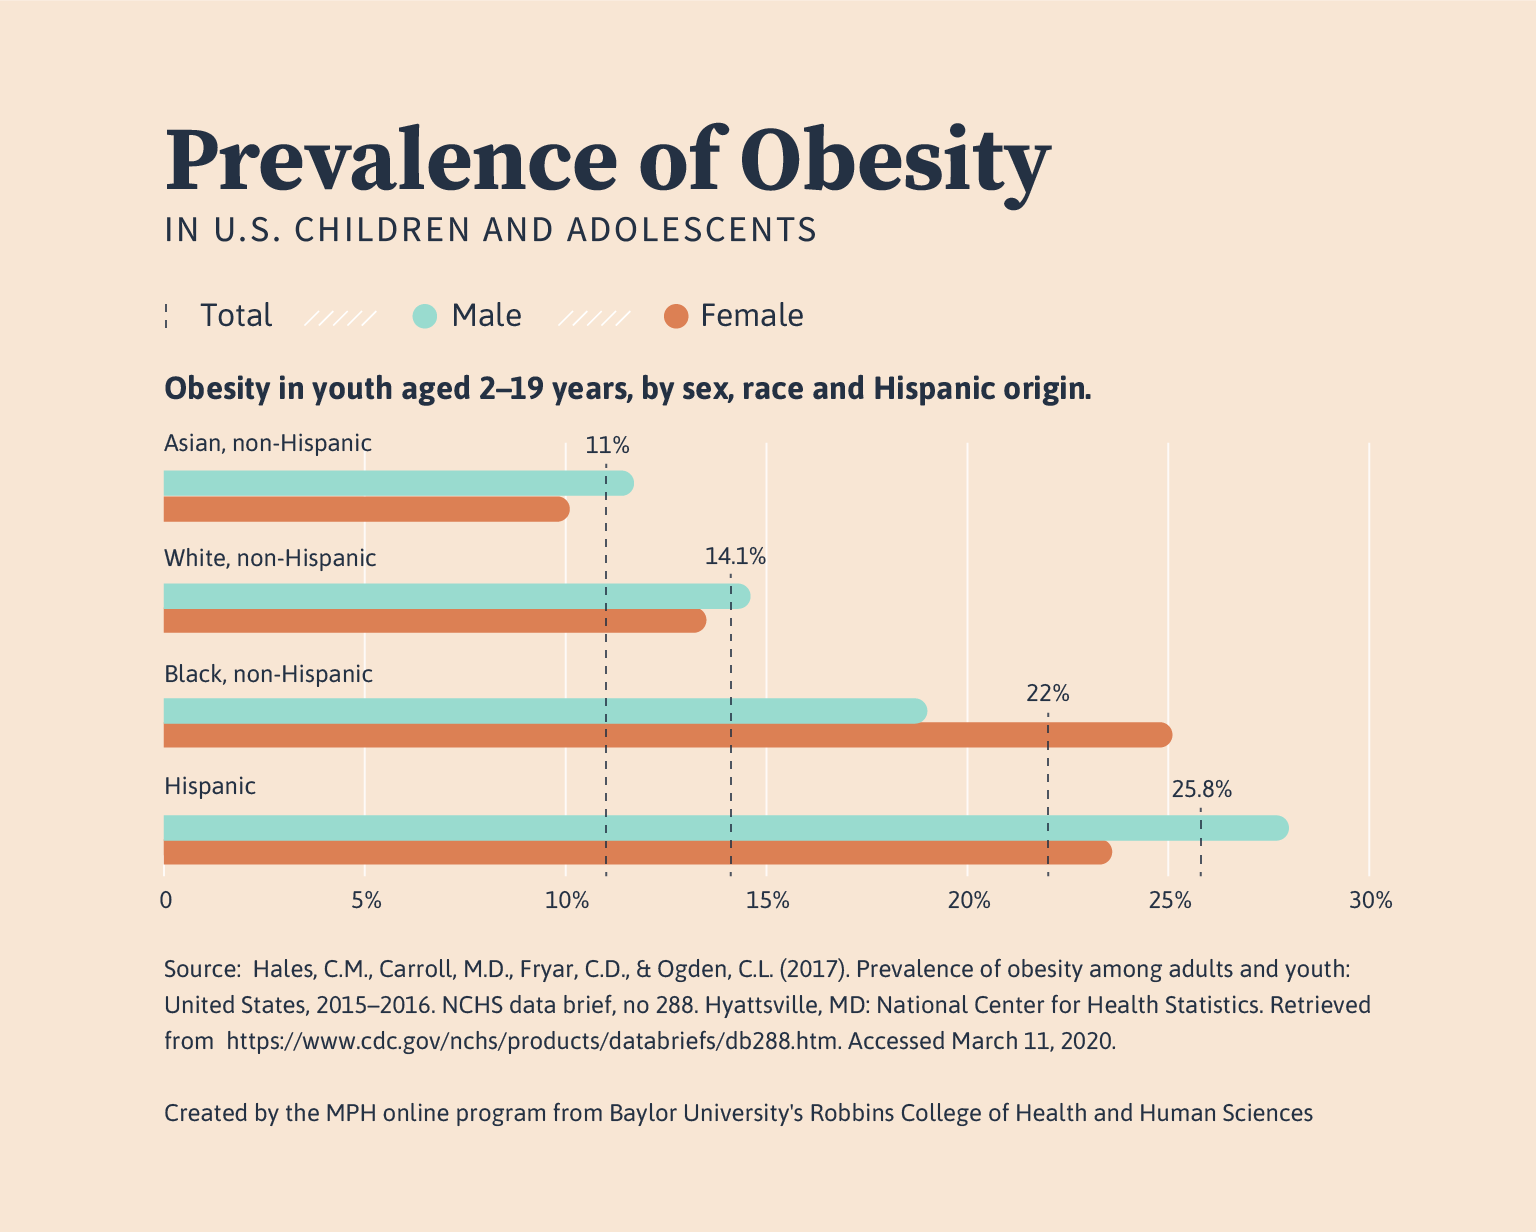 Prevalence of Obesity Among Youths ages 2 to 19, 2015-2016.